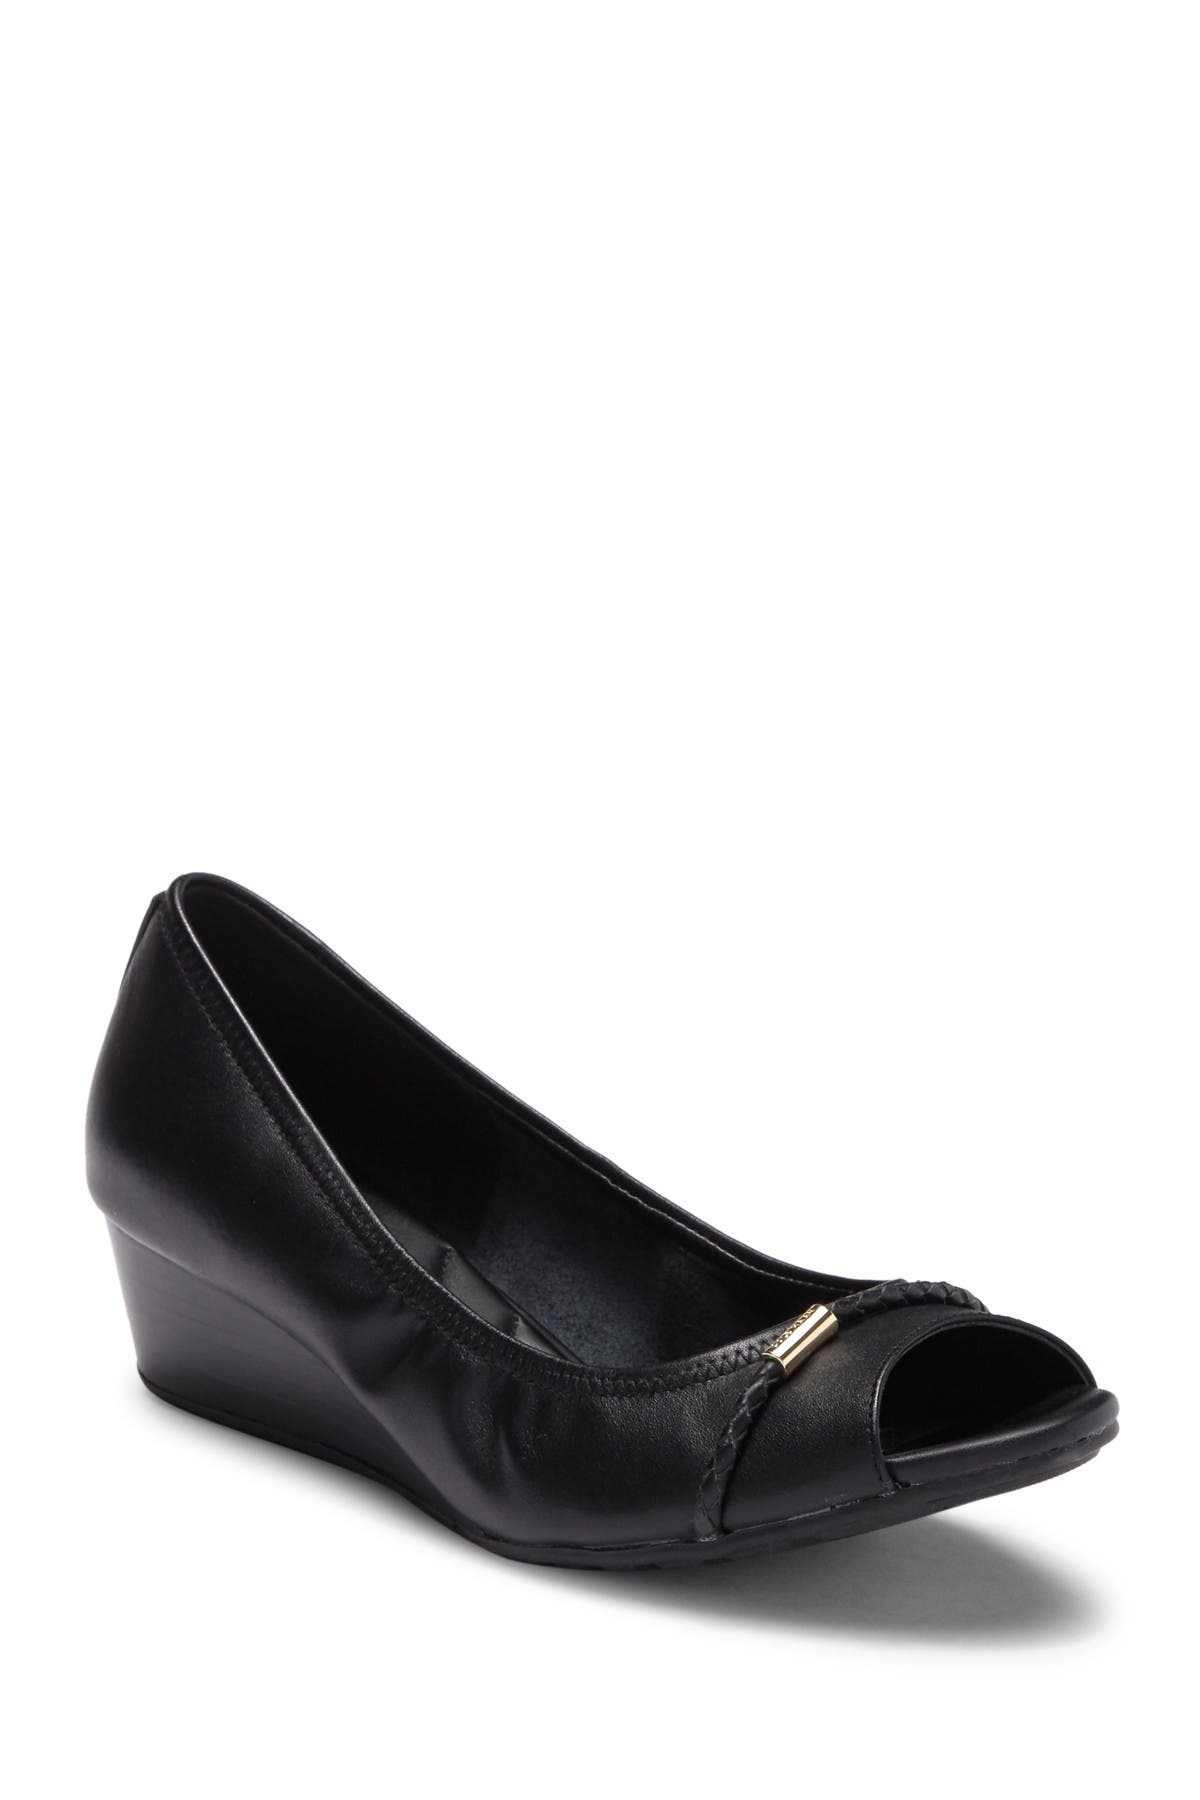 leather wedge pump